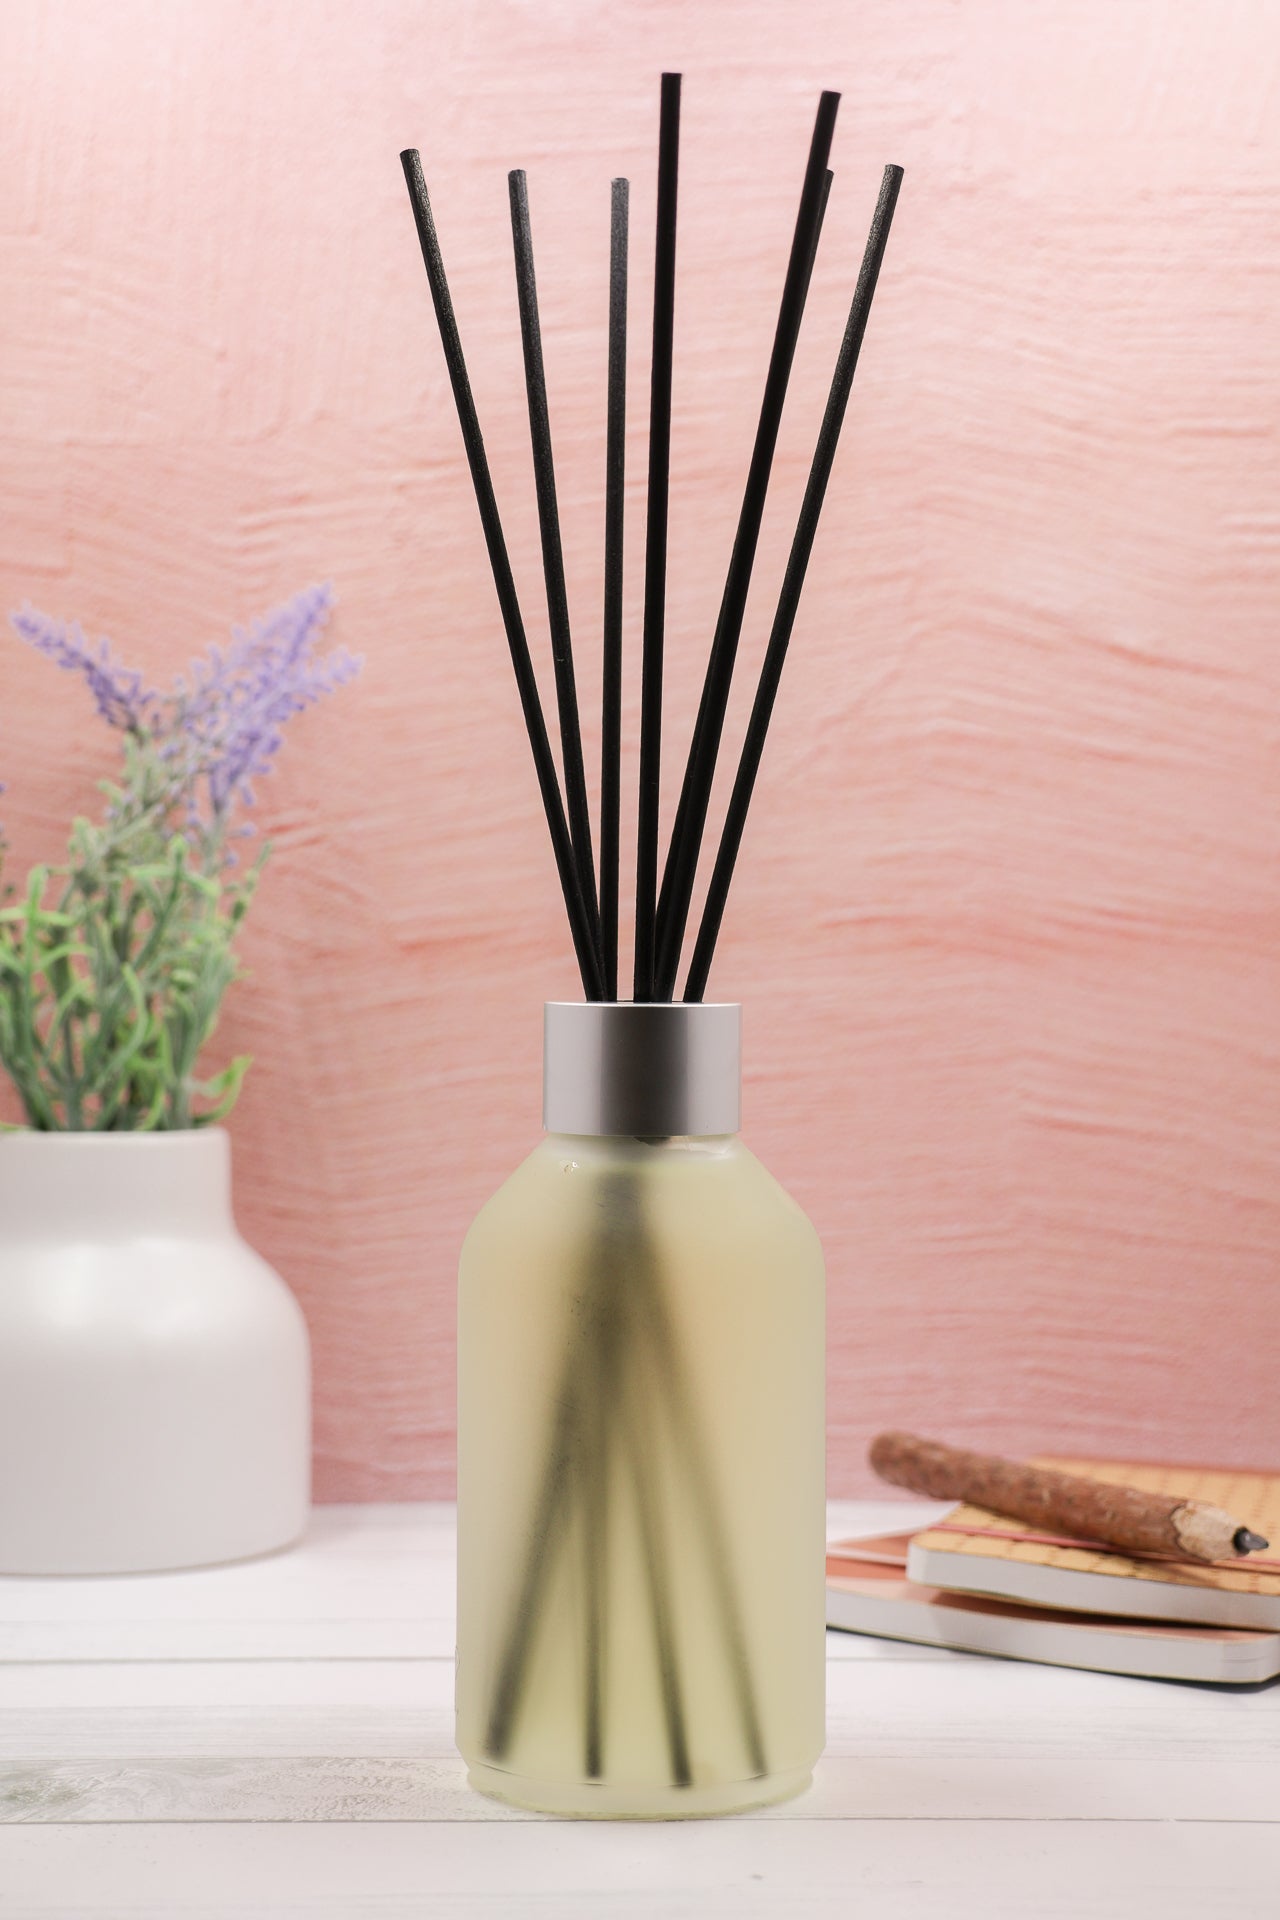 Crystal infused diffuser with wicks with the fragrance Kaffir Lime and Lemongrass